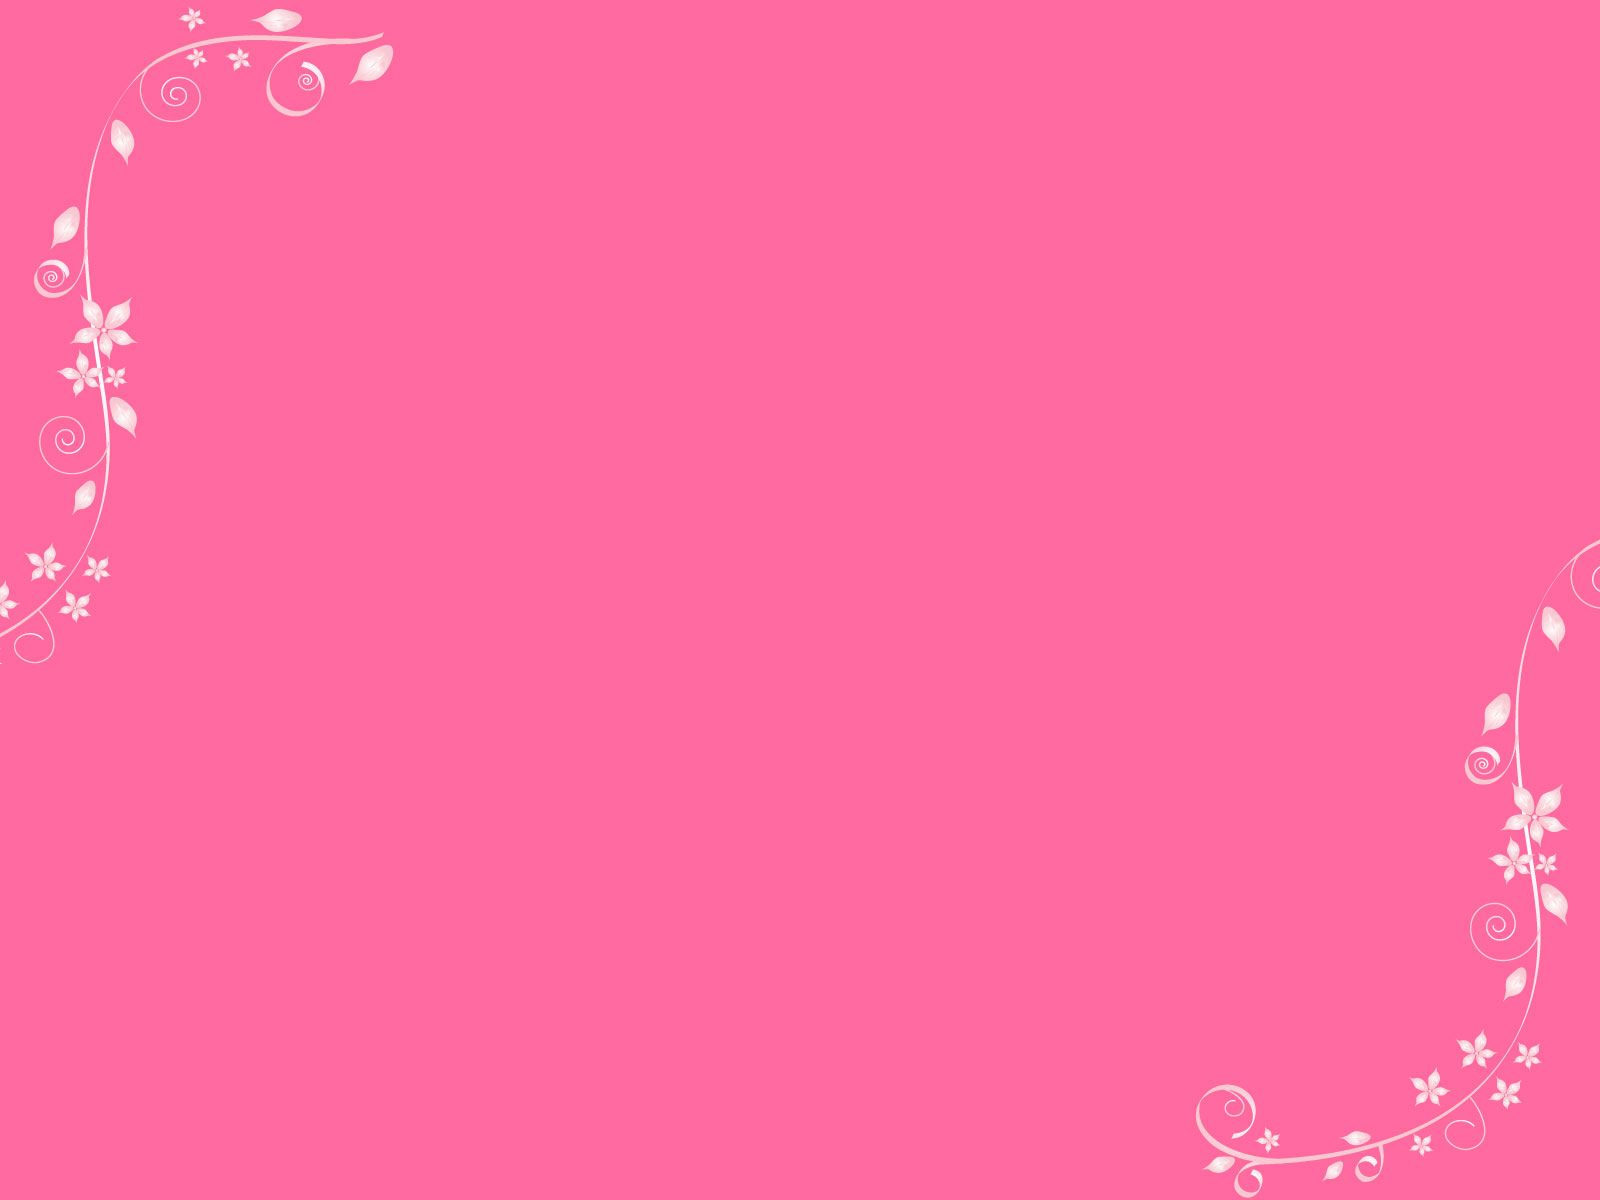 Free Border Frame Wallpaper Background For Powerpoint. Free Image c. Plain pink background, Pink wallpaper background, Framed wallpaper